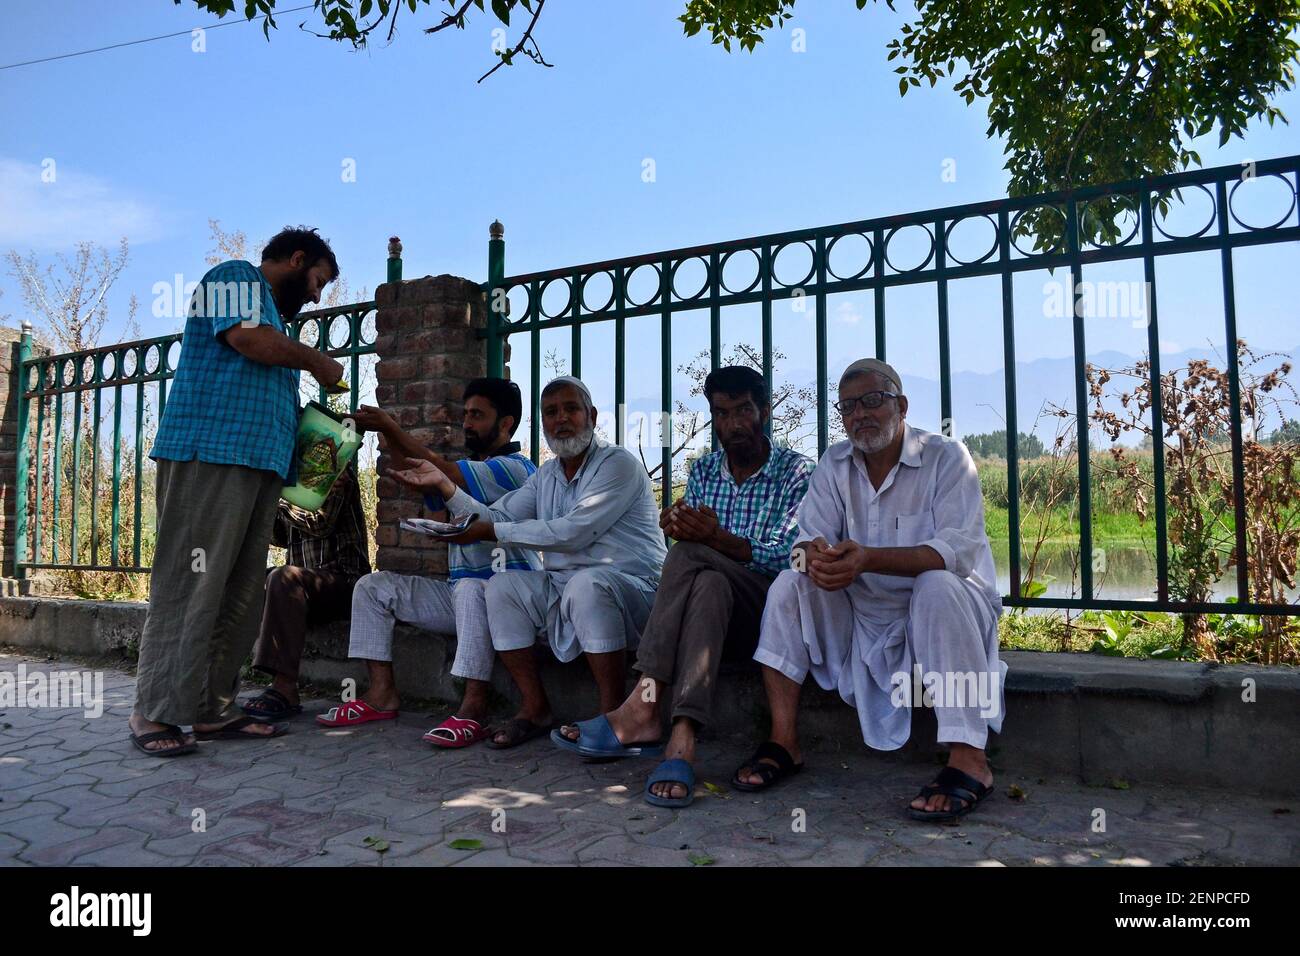 A man distributes food among residents during shutdown in Srinagar, Kashmir. Kashmir valley remained shut for the 40th consecutive day following the scrapping of Article 370 by the central government which grants special status to Jammu & Kashmir. (Photo by Saqib Majeed / SOPA Images/Sipa USA) Stock Photo